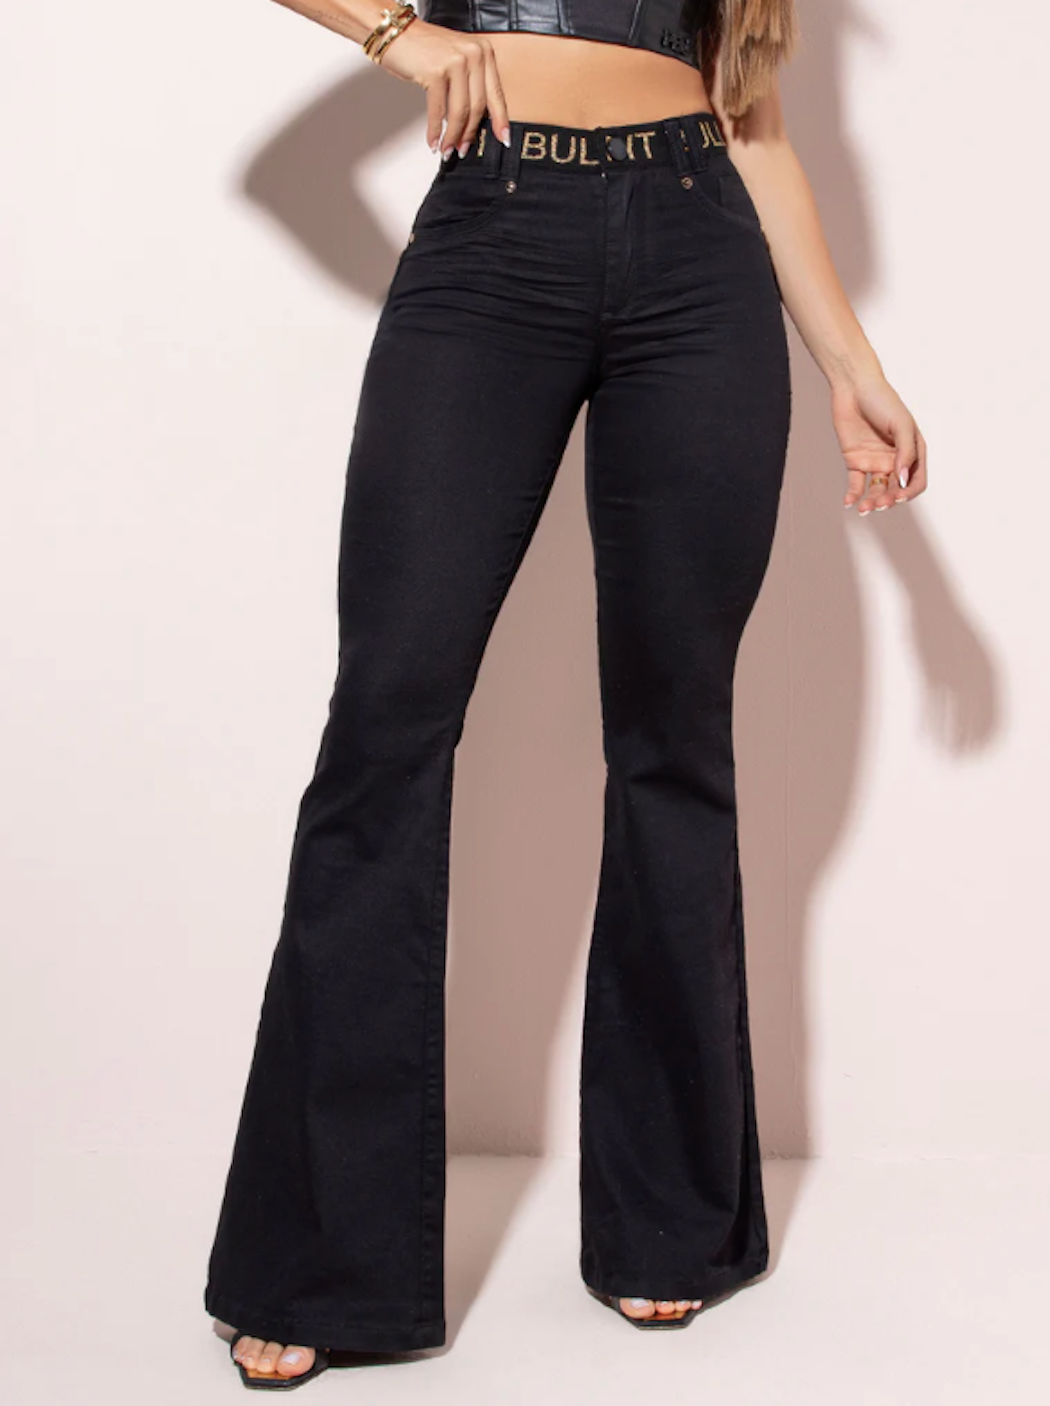 Pit Bull Jeans Women's Flare High Waisted Pants 66538